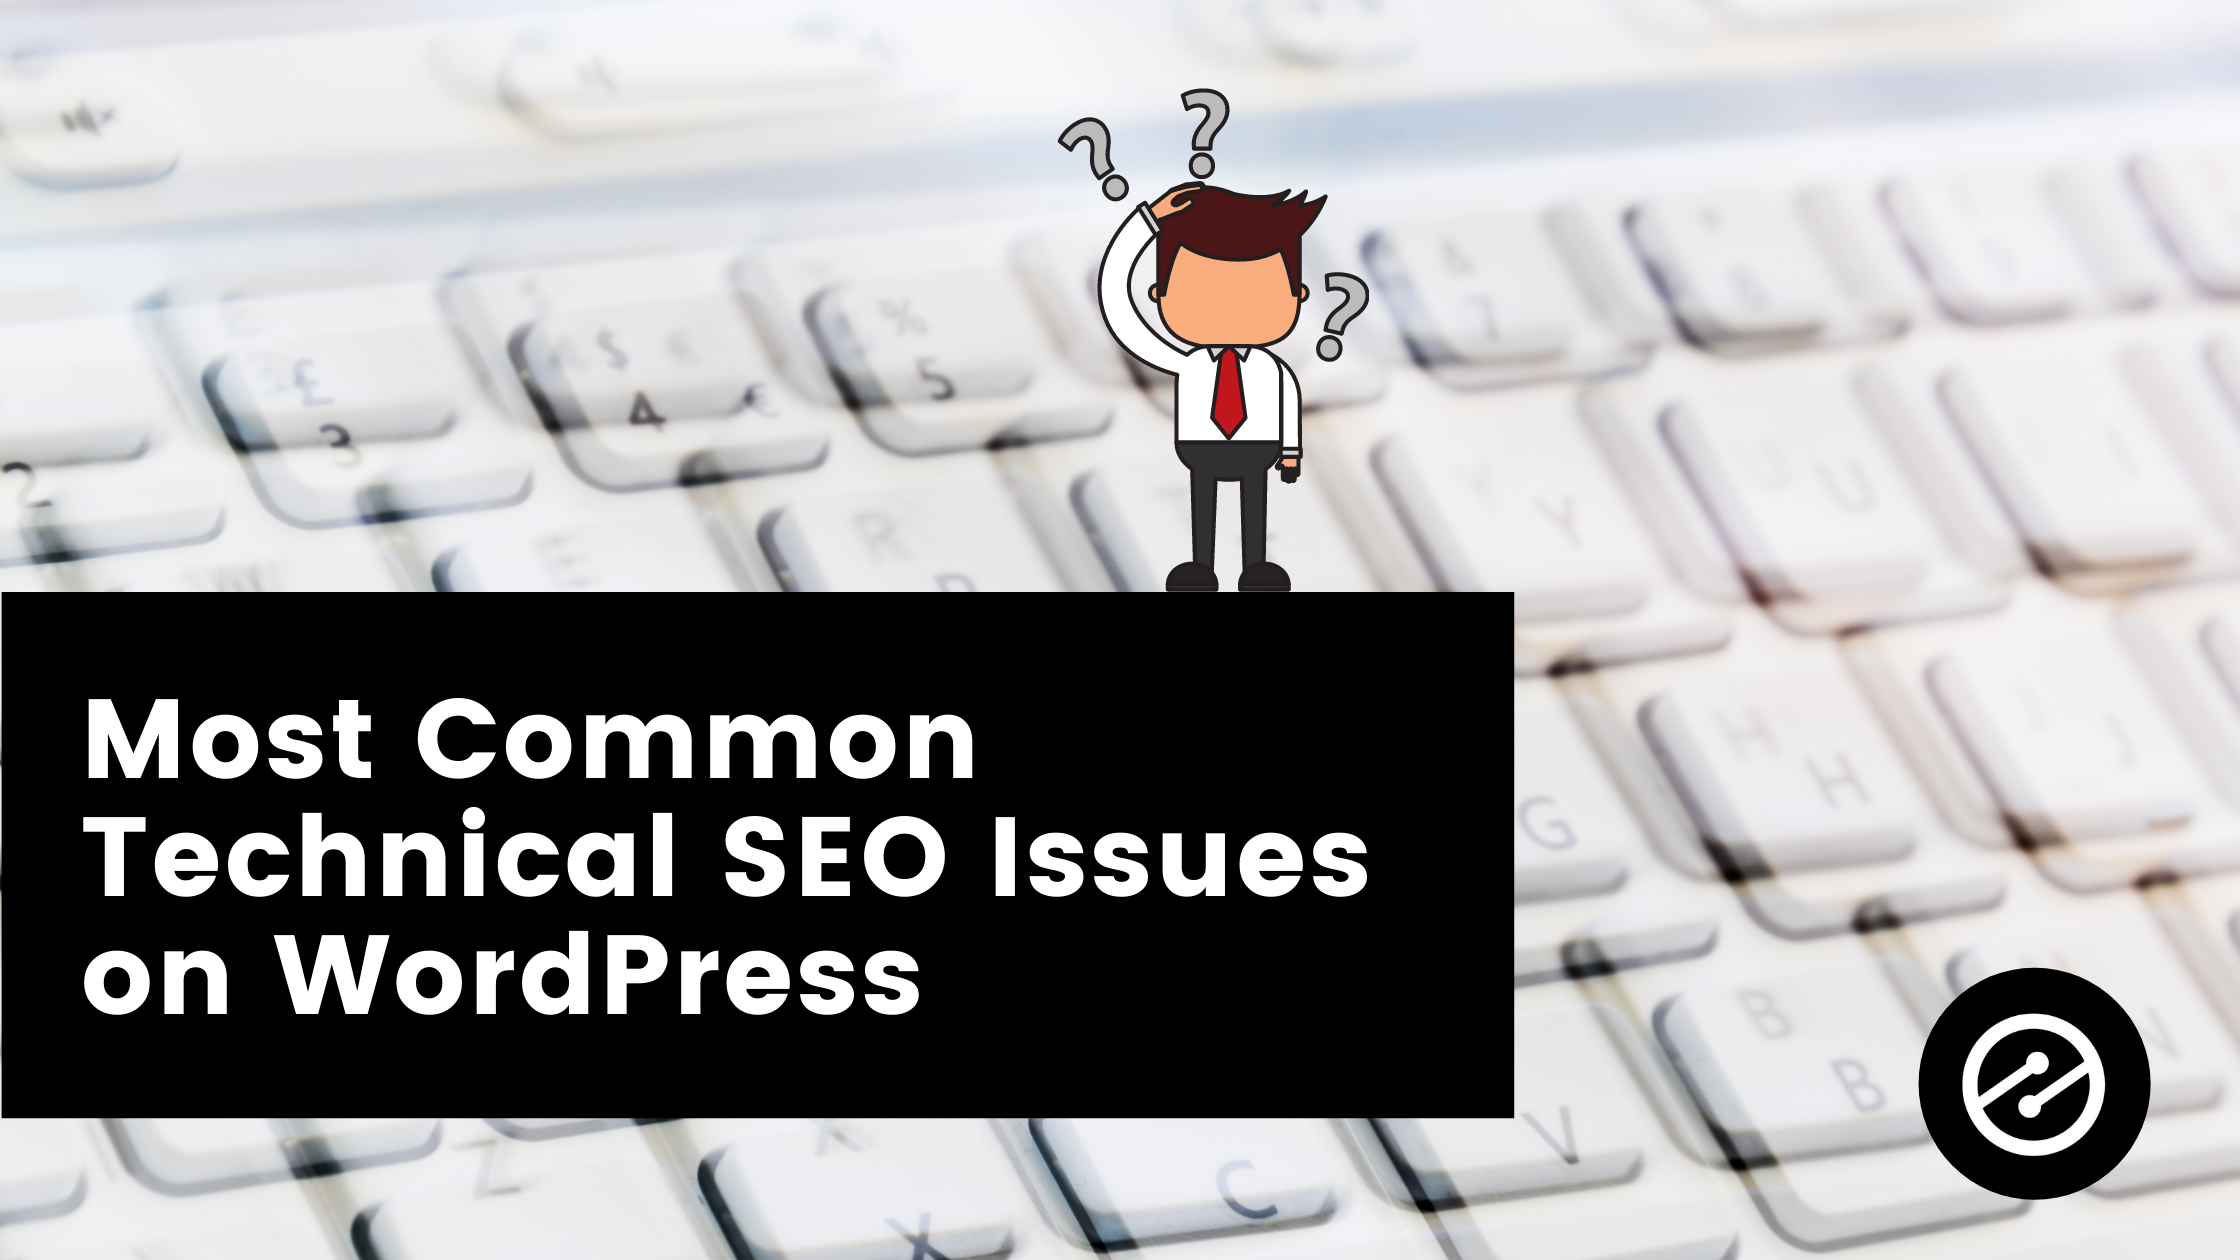 Most Common Technical SEO Issues on WordPress